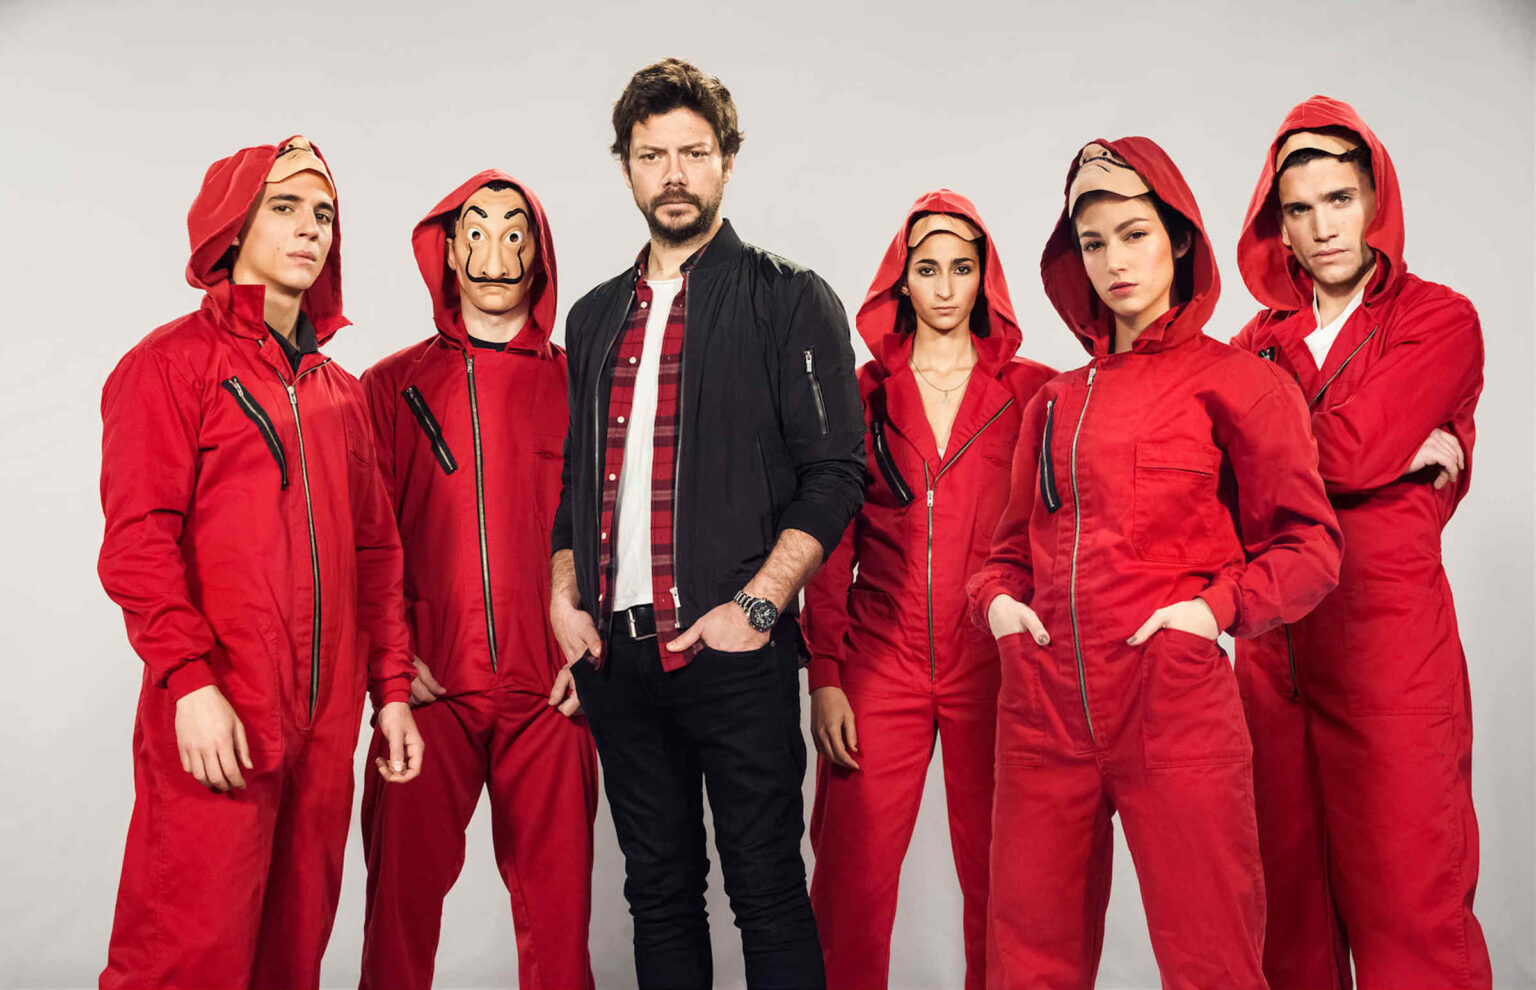 If you're looking to watch the 'Money Heist' cast while waiting for season 5 these are the shows and movies to add to you list.